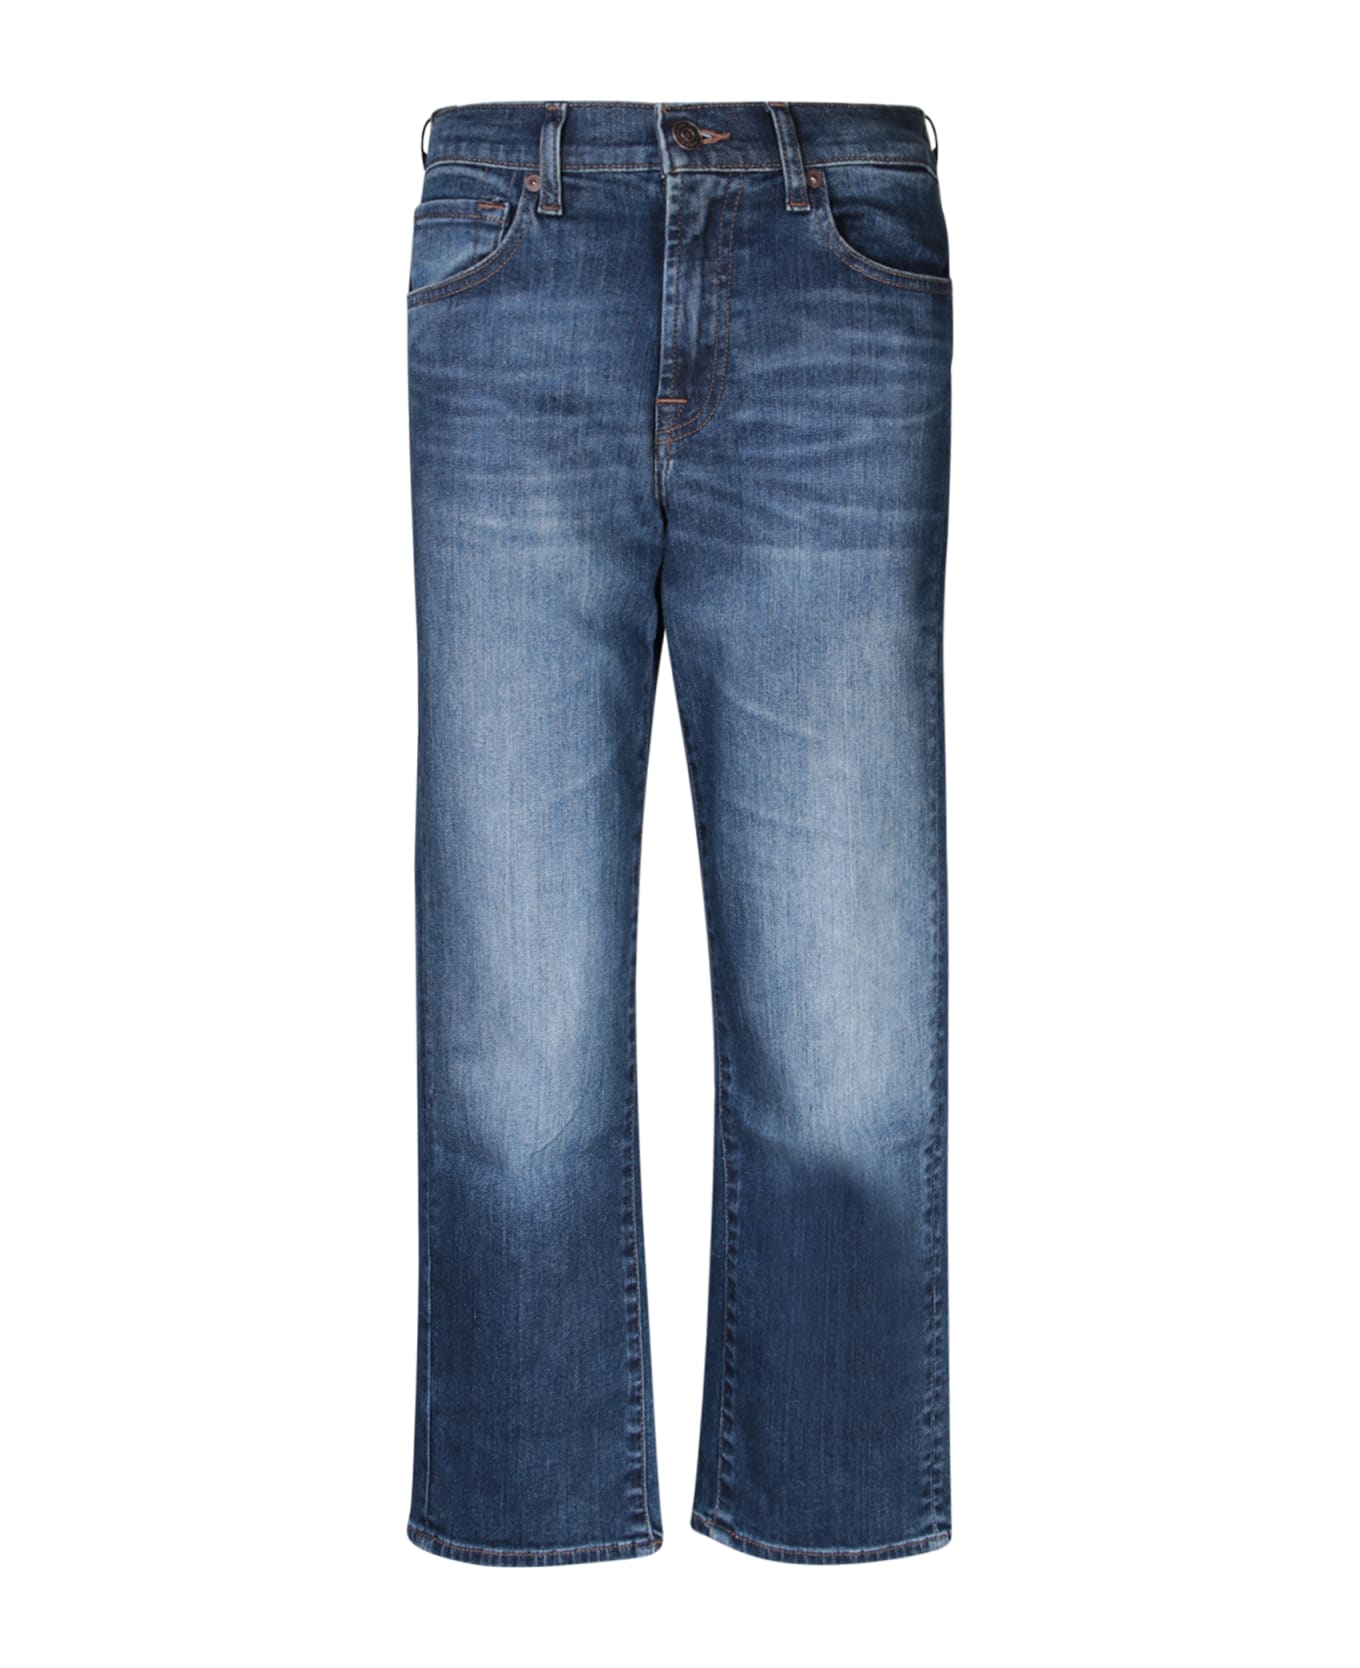 7 For All Mankind The Modern Straight Blue Jeans - Blue